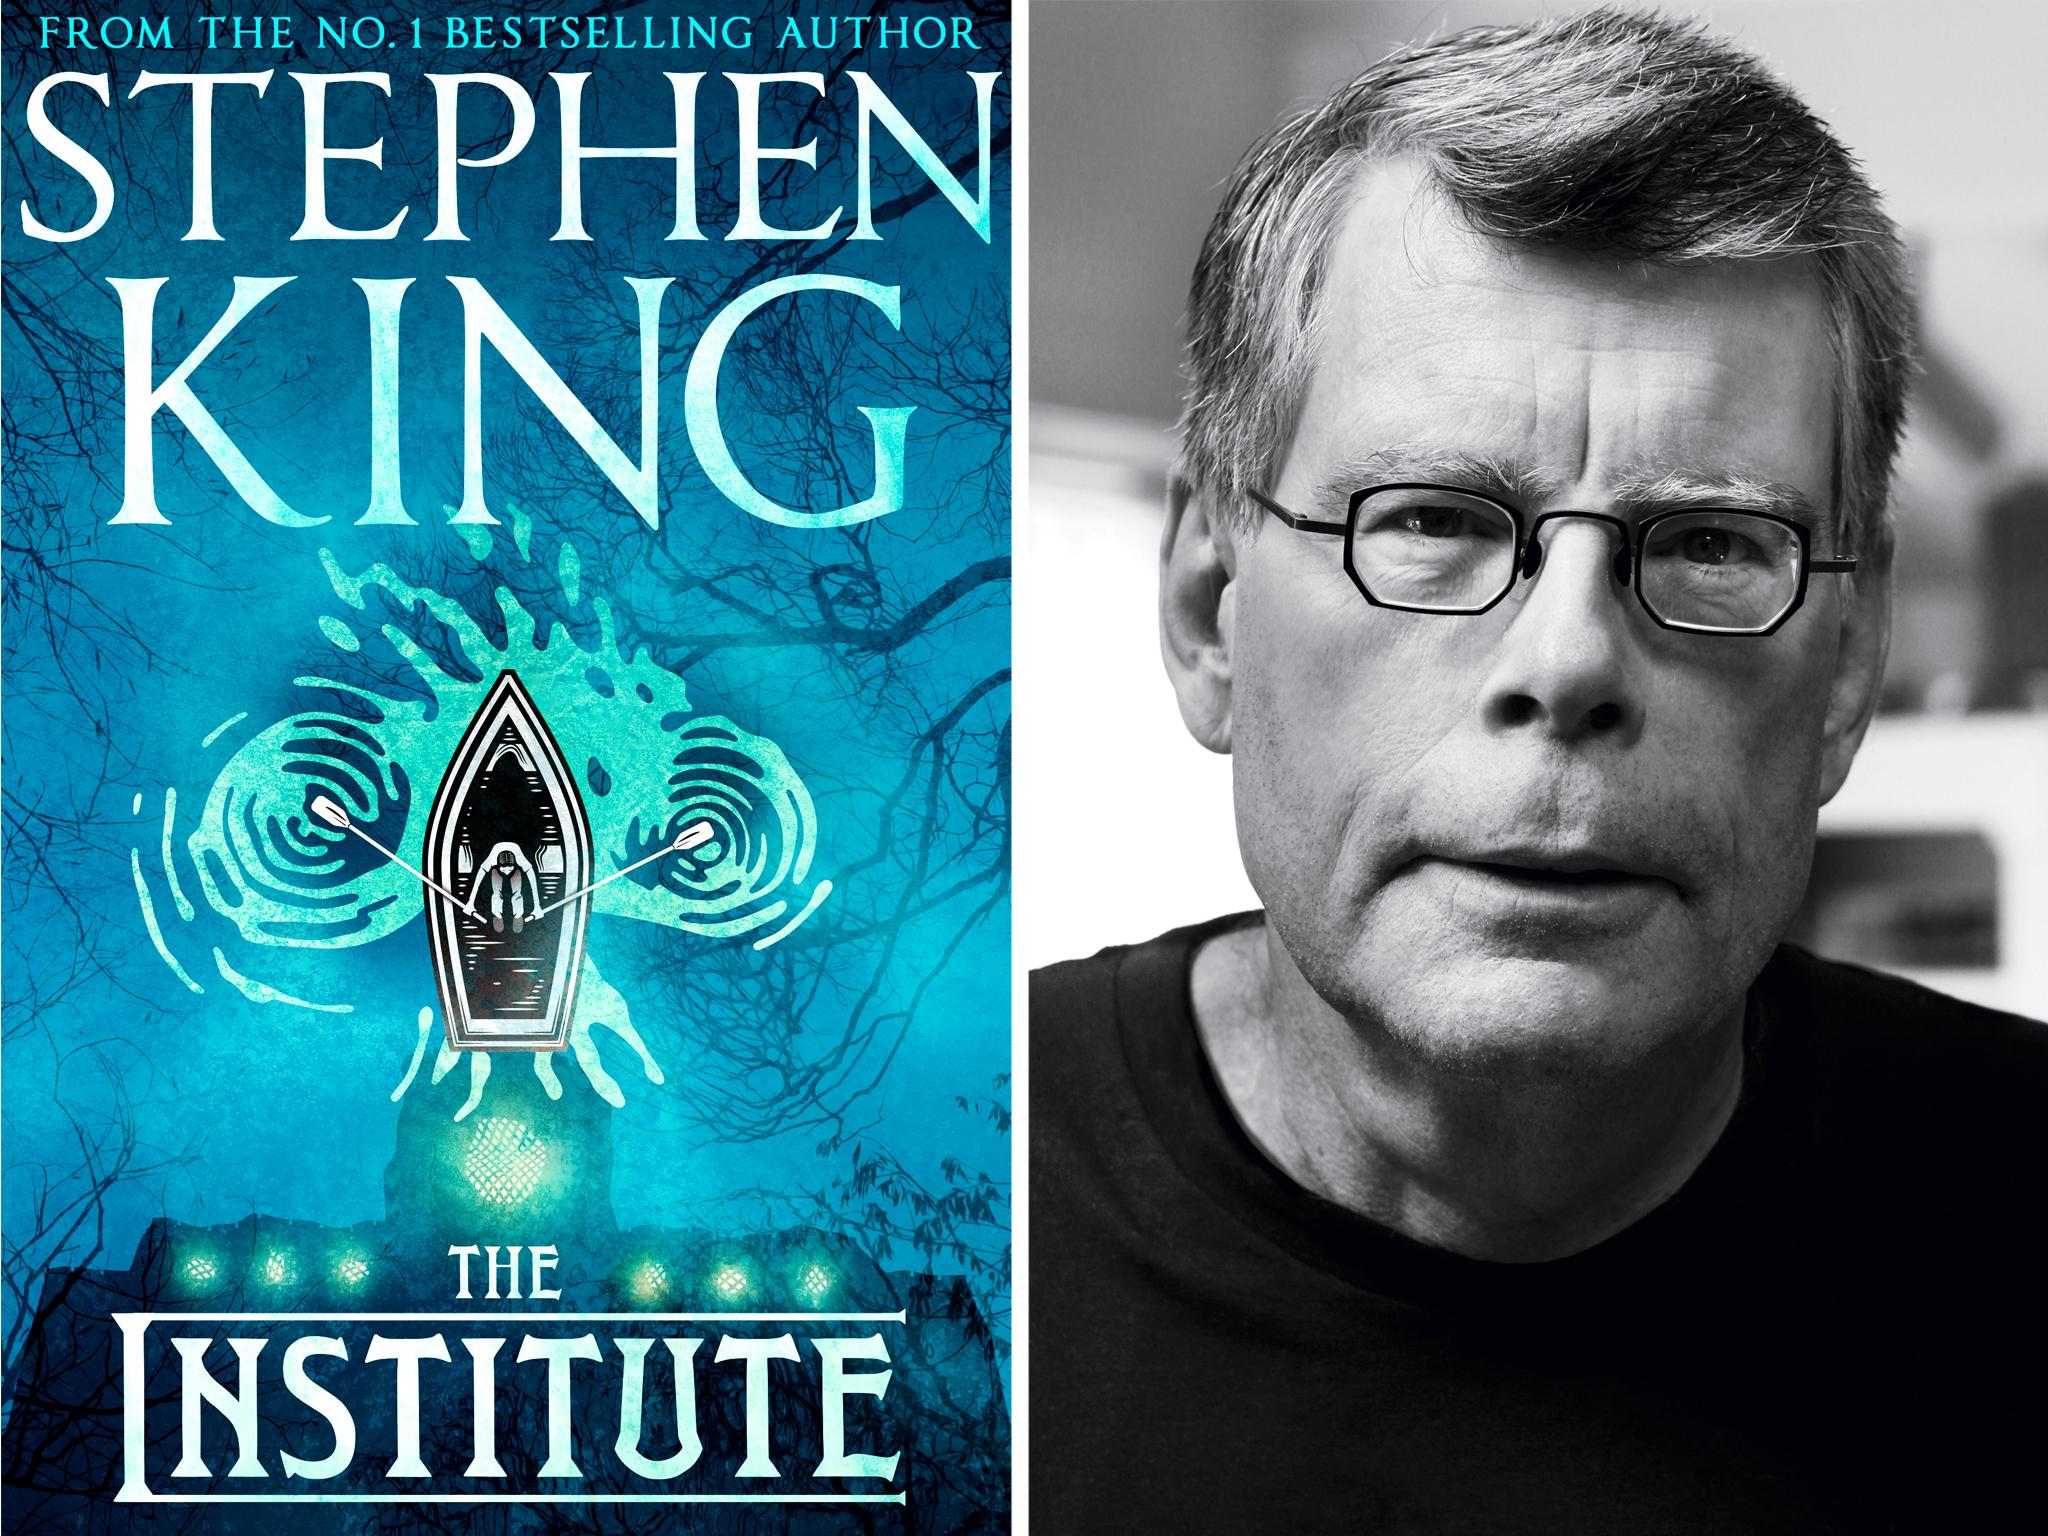 stephen king the institute